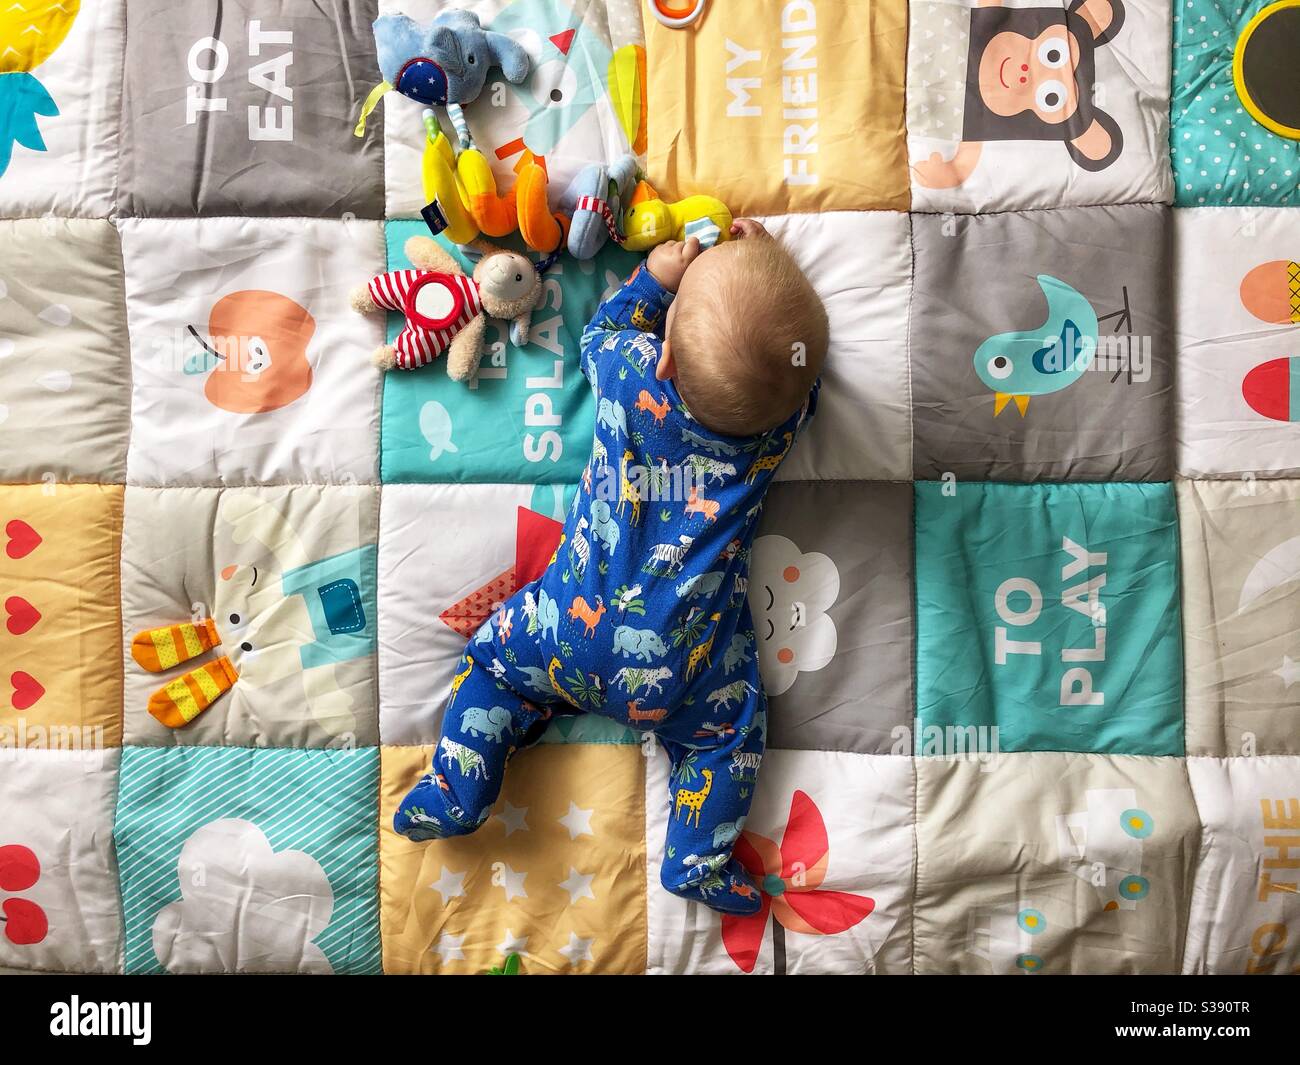 play mat for 5 month old baby